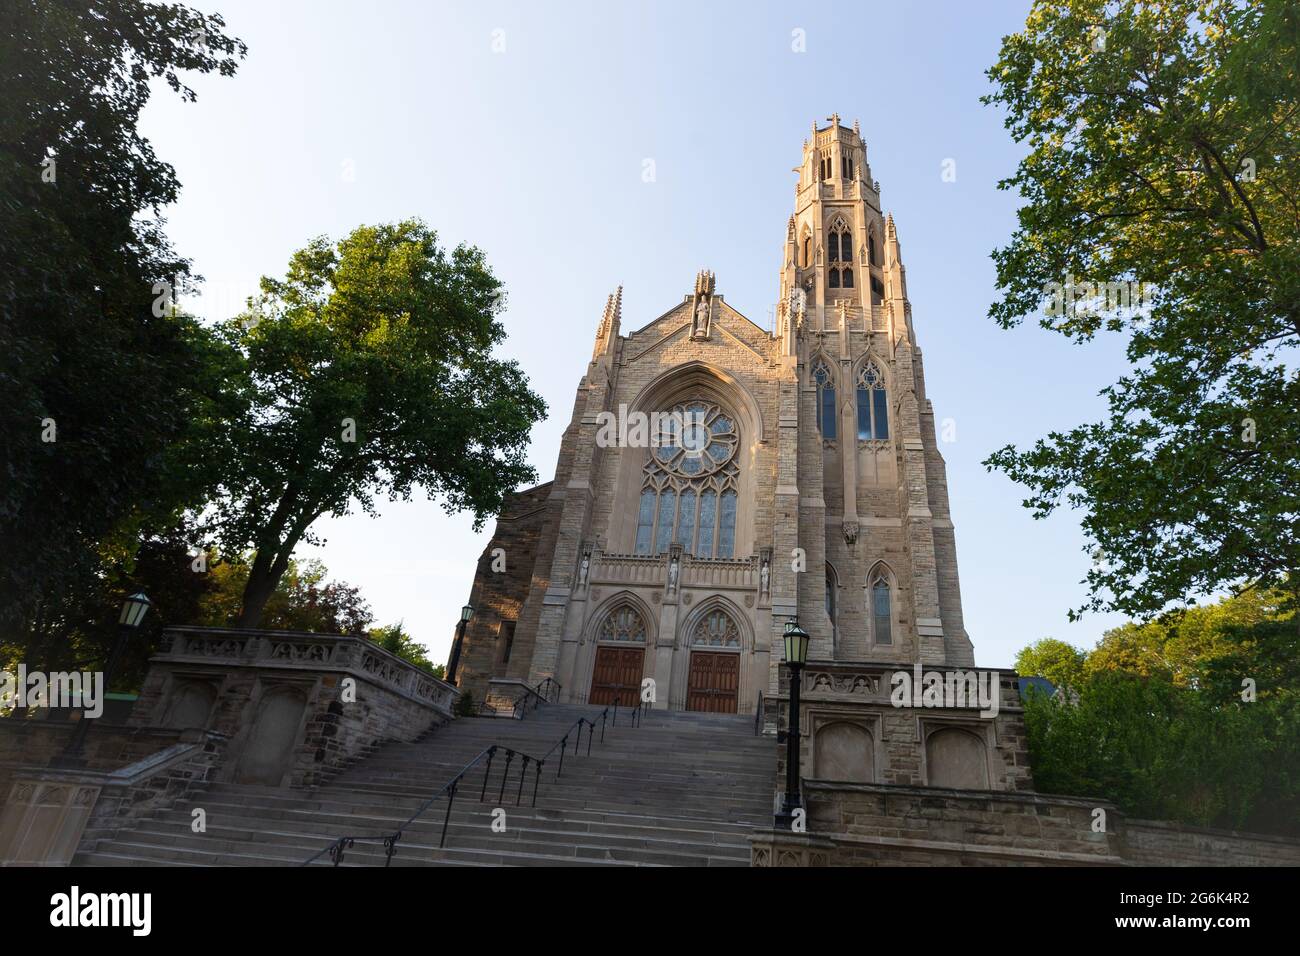 Outside view of the Cathedral Basilica of Christ the King Roman Catholic church building. Stock Photo